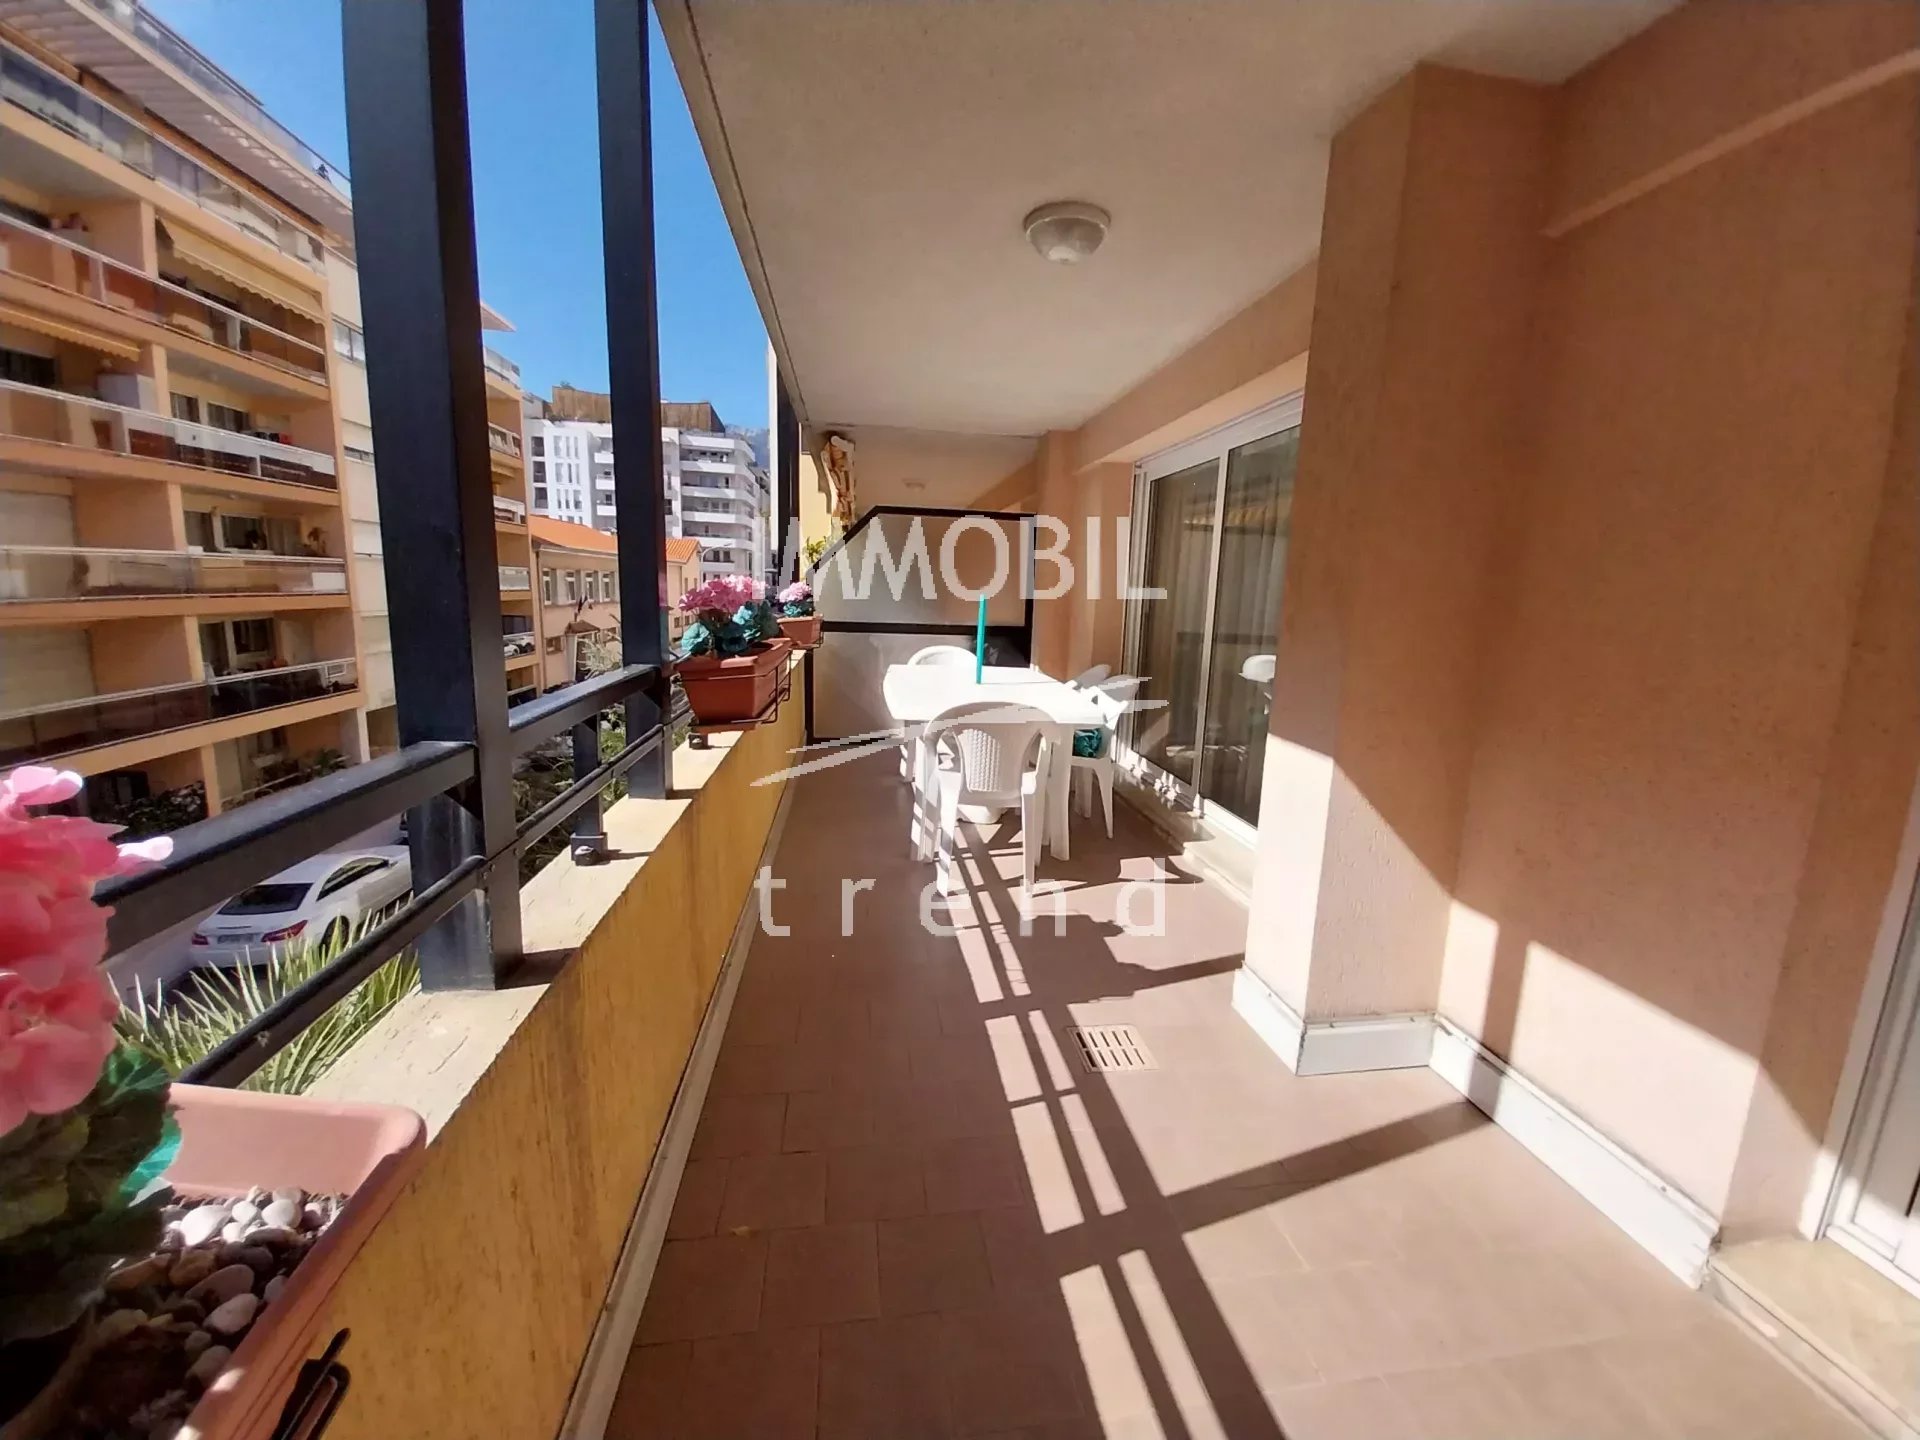 SOLE AGENT - MENTON CENTENAIRE - Two bedroom apartment with terrace and balcony